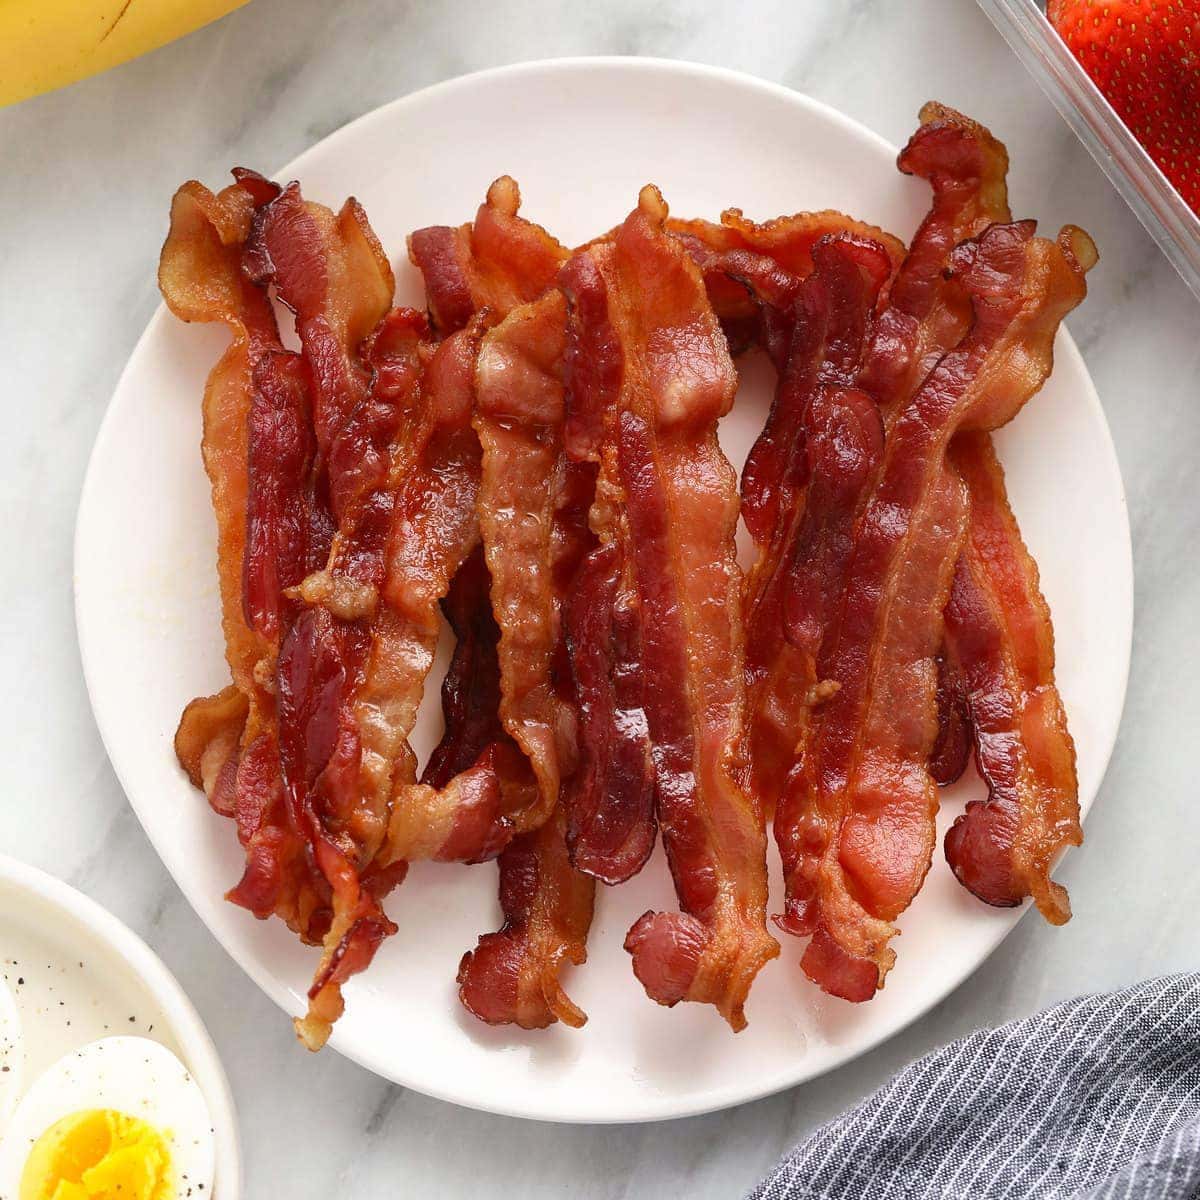 https://fitfoodiefinds.com/wp-content/uploads/2021/02/bacon-sq.jpg